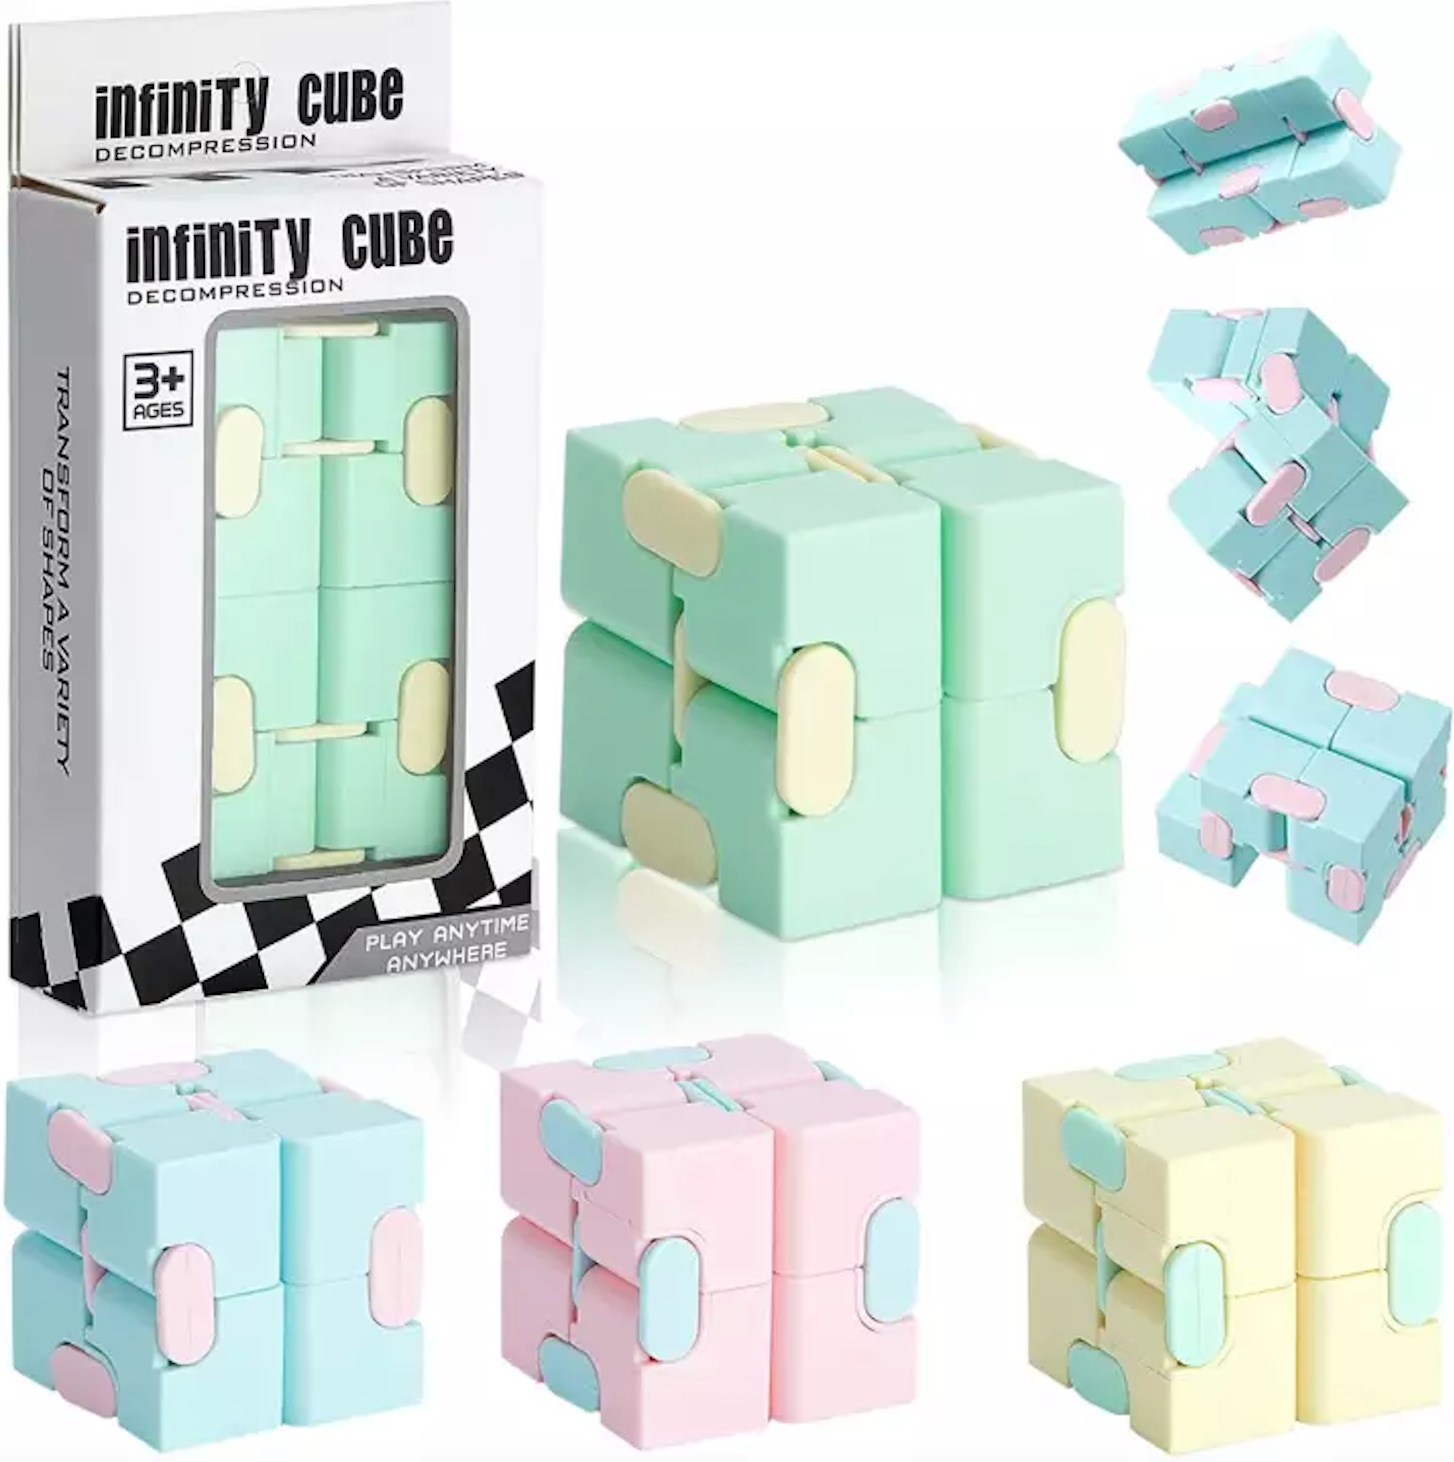 Infinity Cube - Decompression (Assorted Colors)